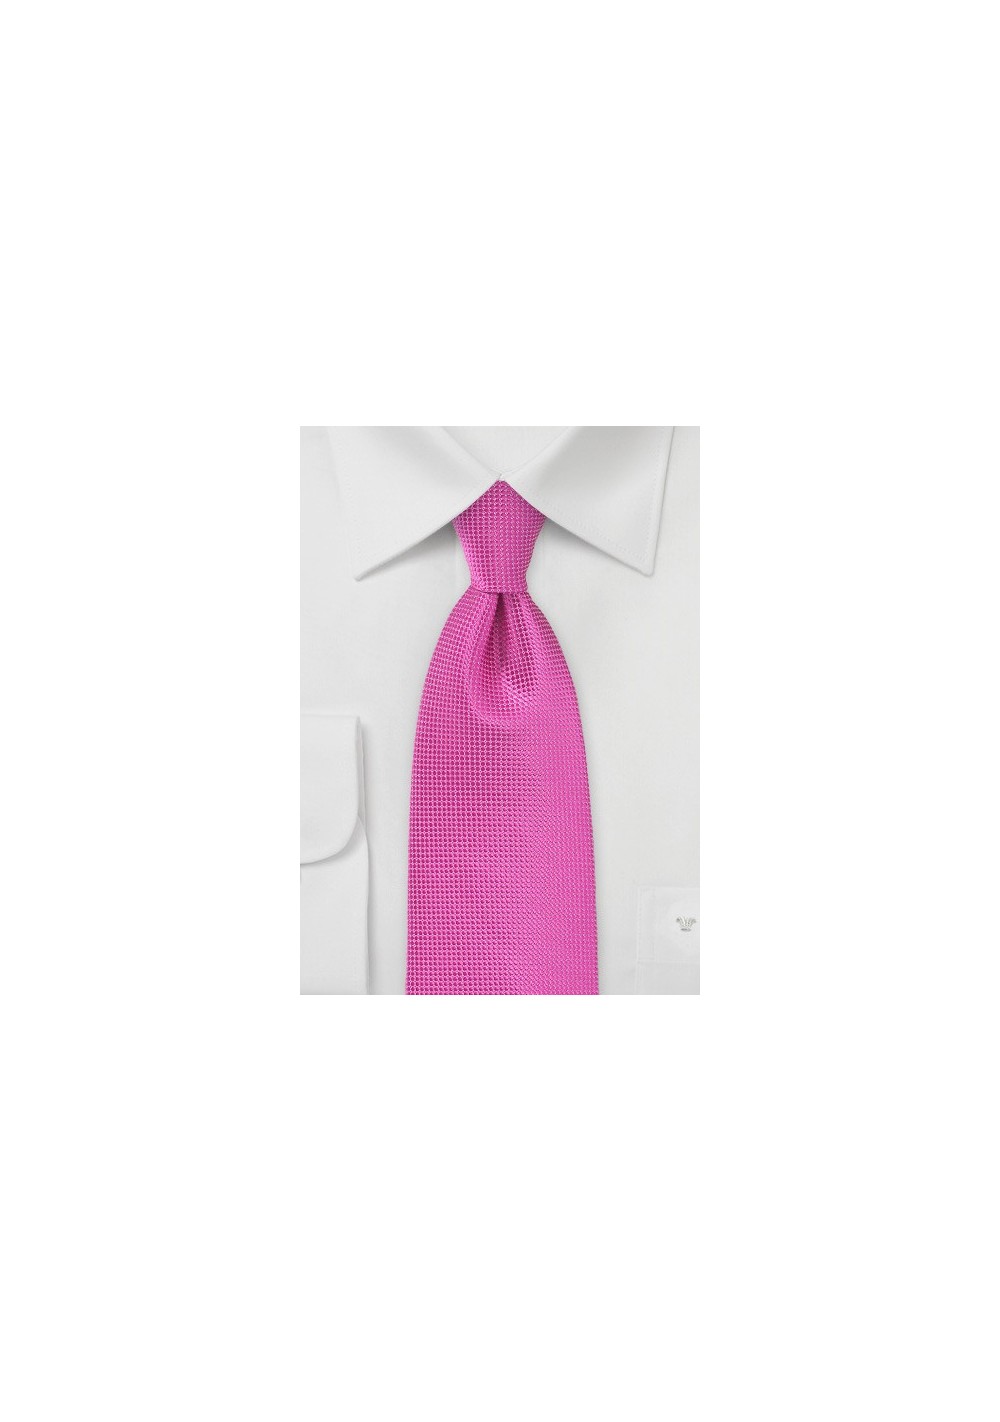 Textured Tie in Paradise Pink